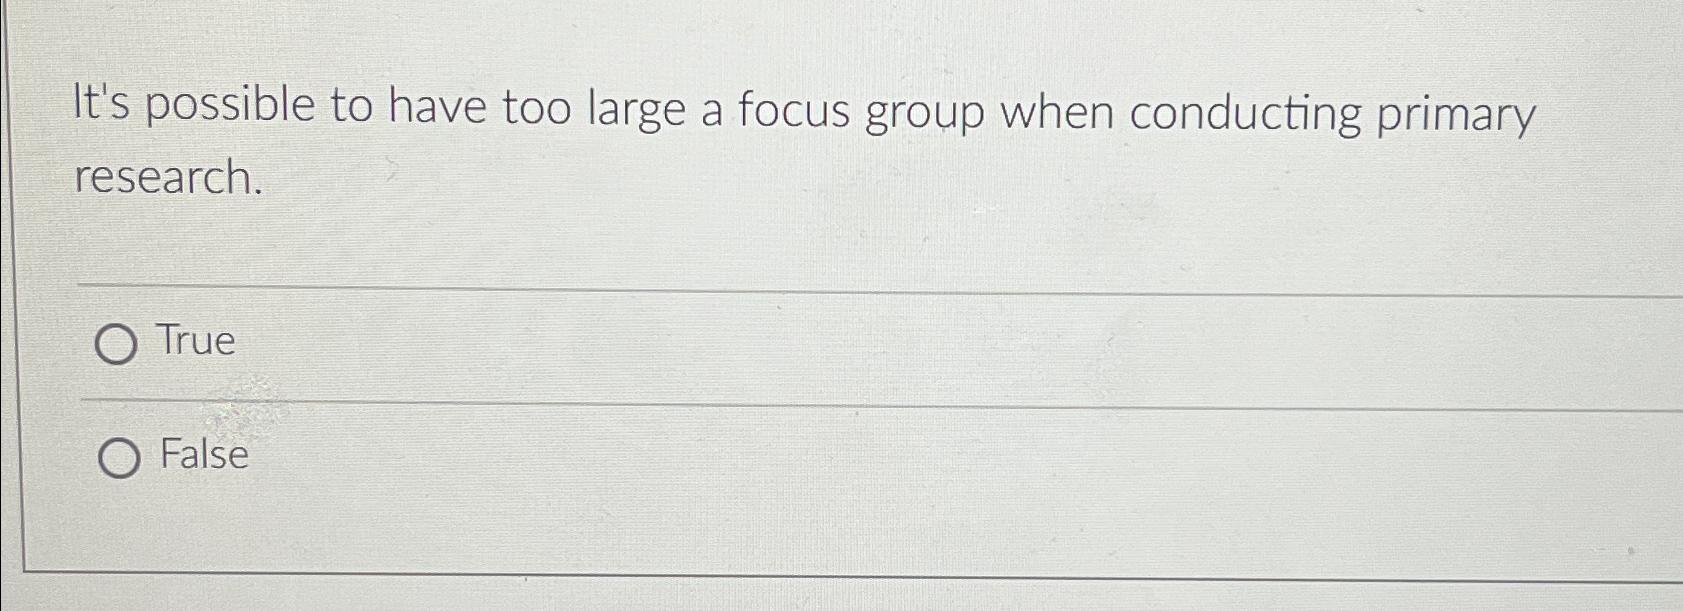 It's possible to have too large a focus group when conducting primary research. O True O False